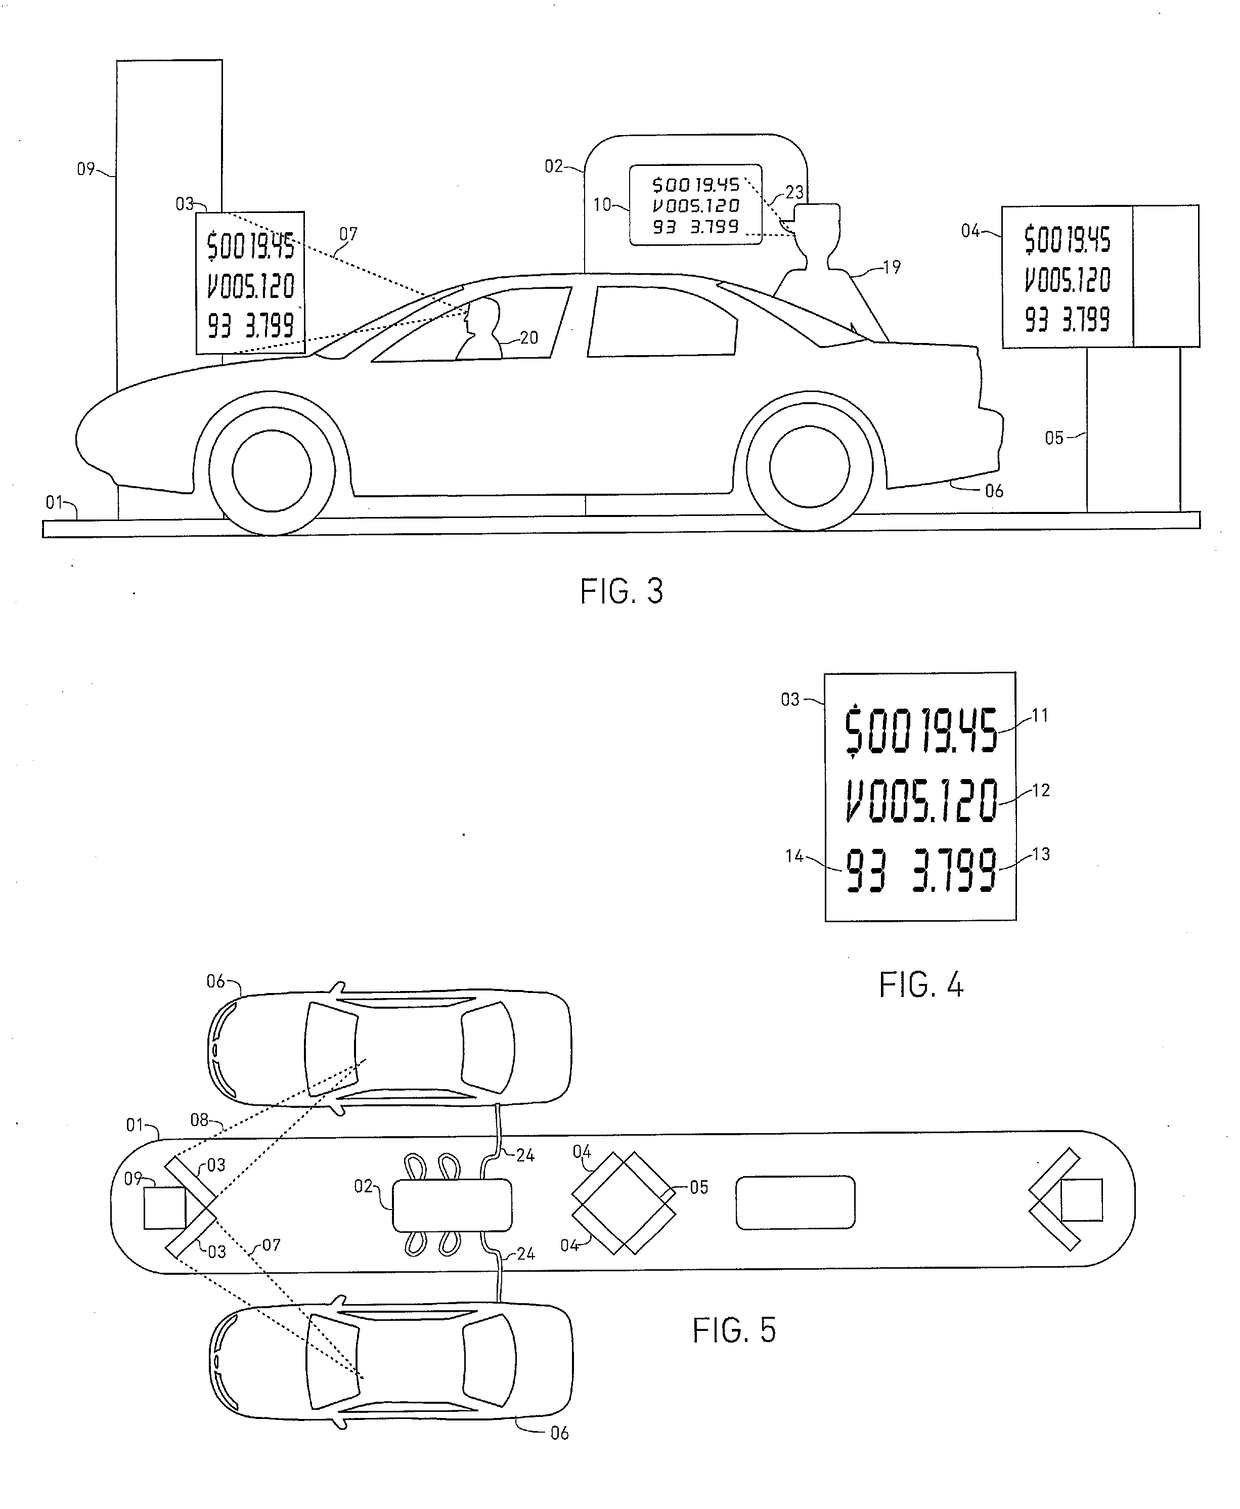 Fuel Dispensing System with Secondary Display Optimized For Full Service Stations